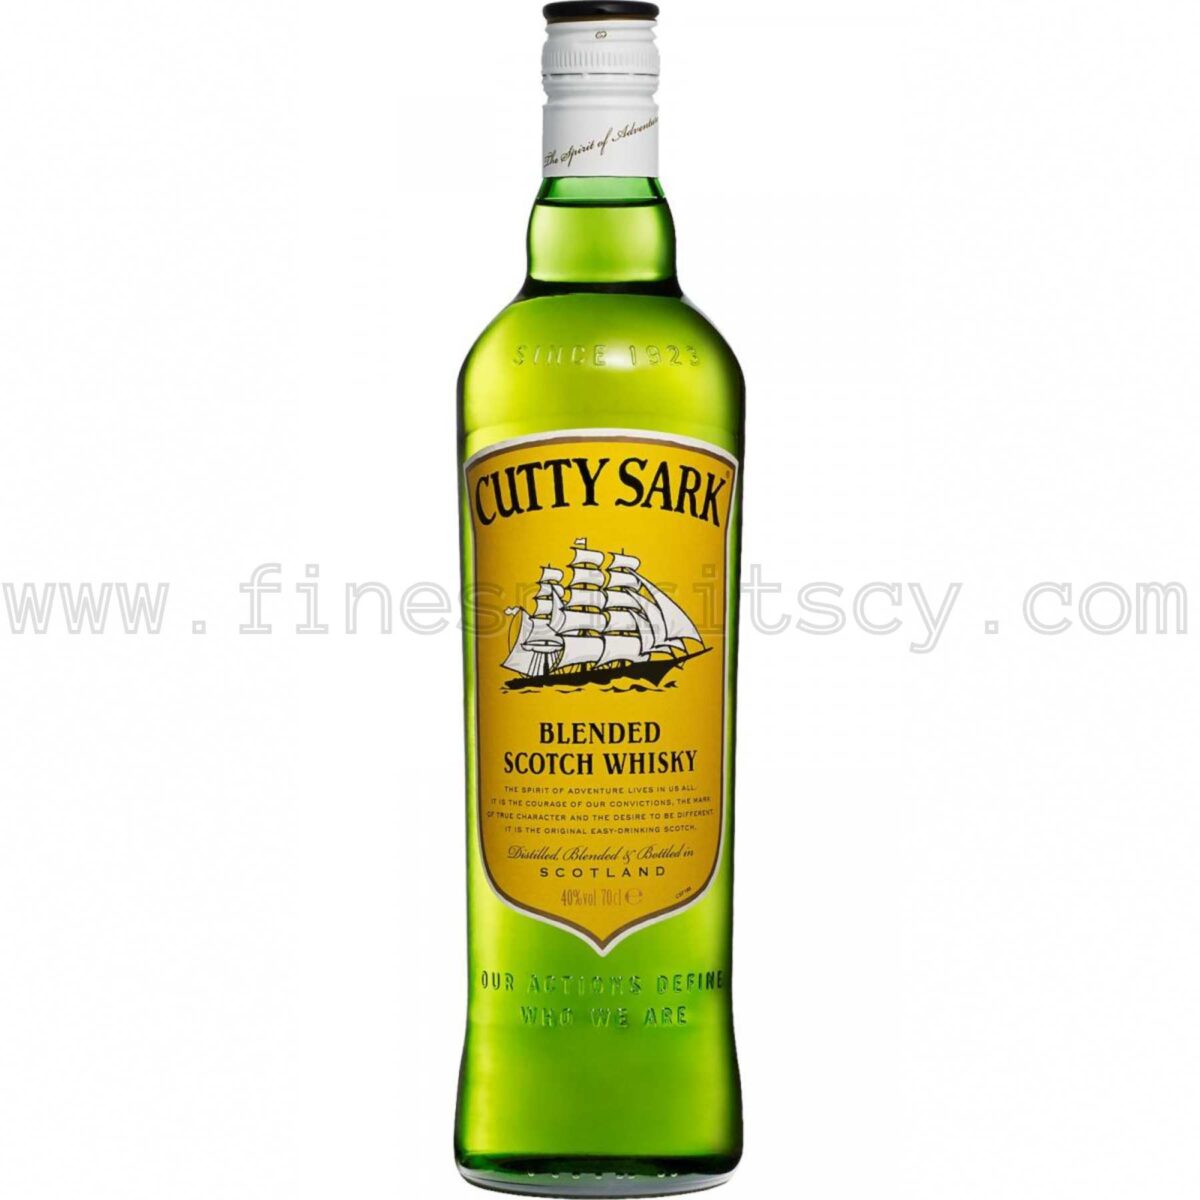 Cutty Sark Original Whisky Blended Scotch Whiskey 700ml 70cl 0.7L Price Cyprus